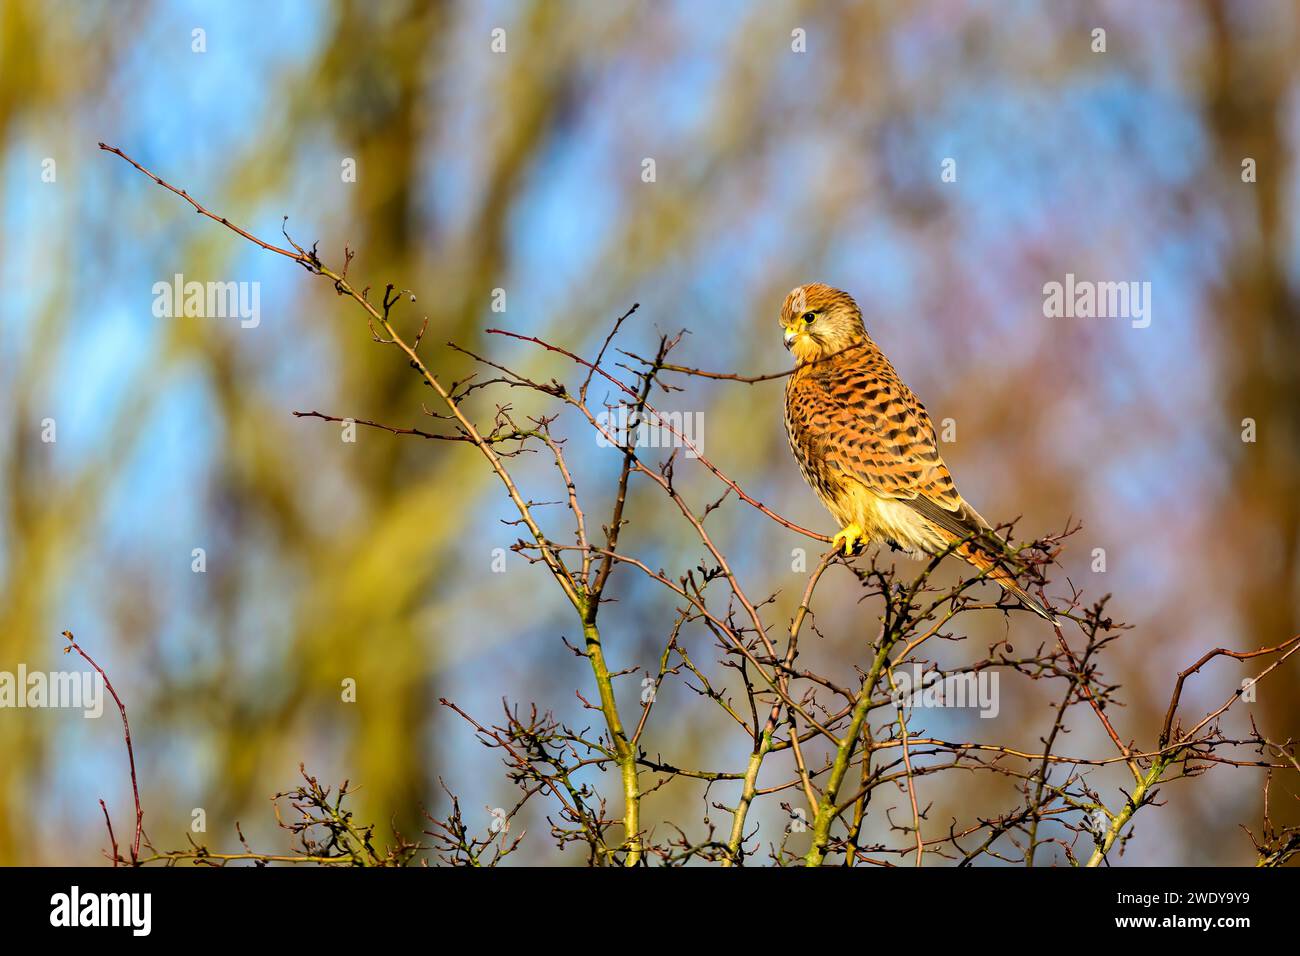 Female Kestrel, Falco tinnunculus, perched on a tree branch Stock Photo